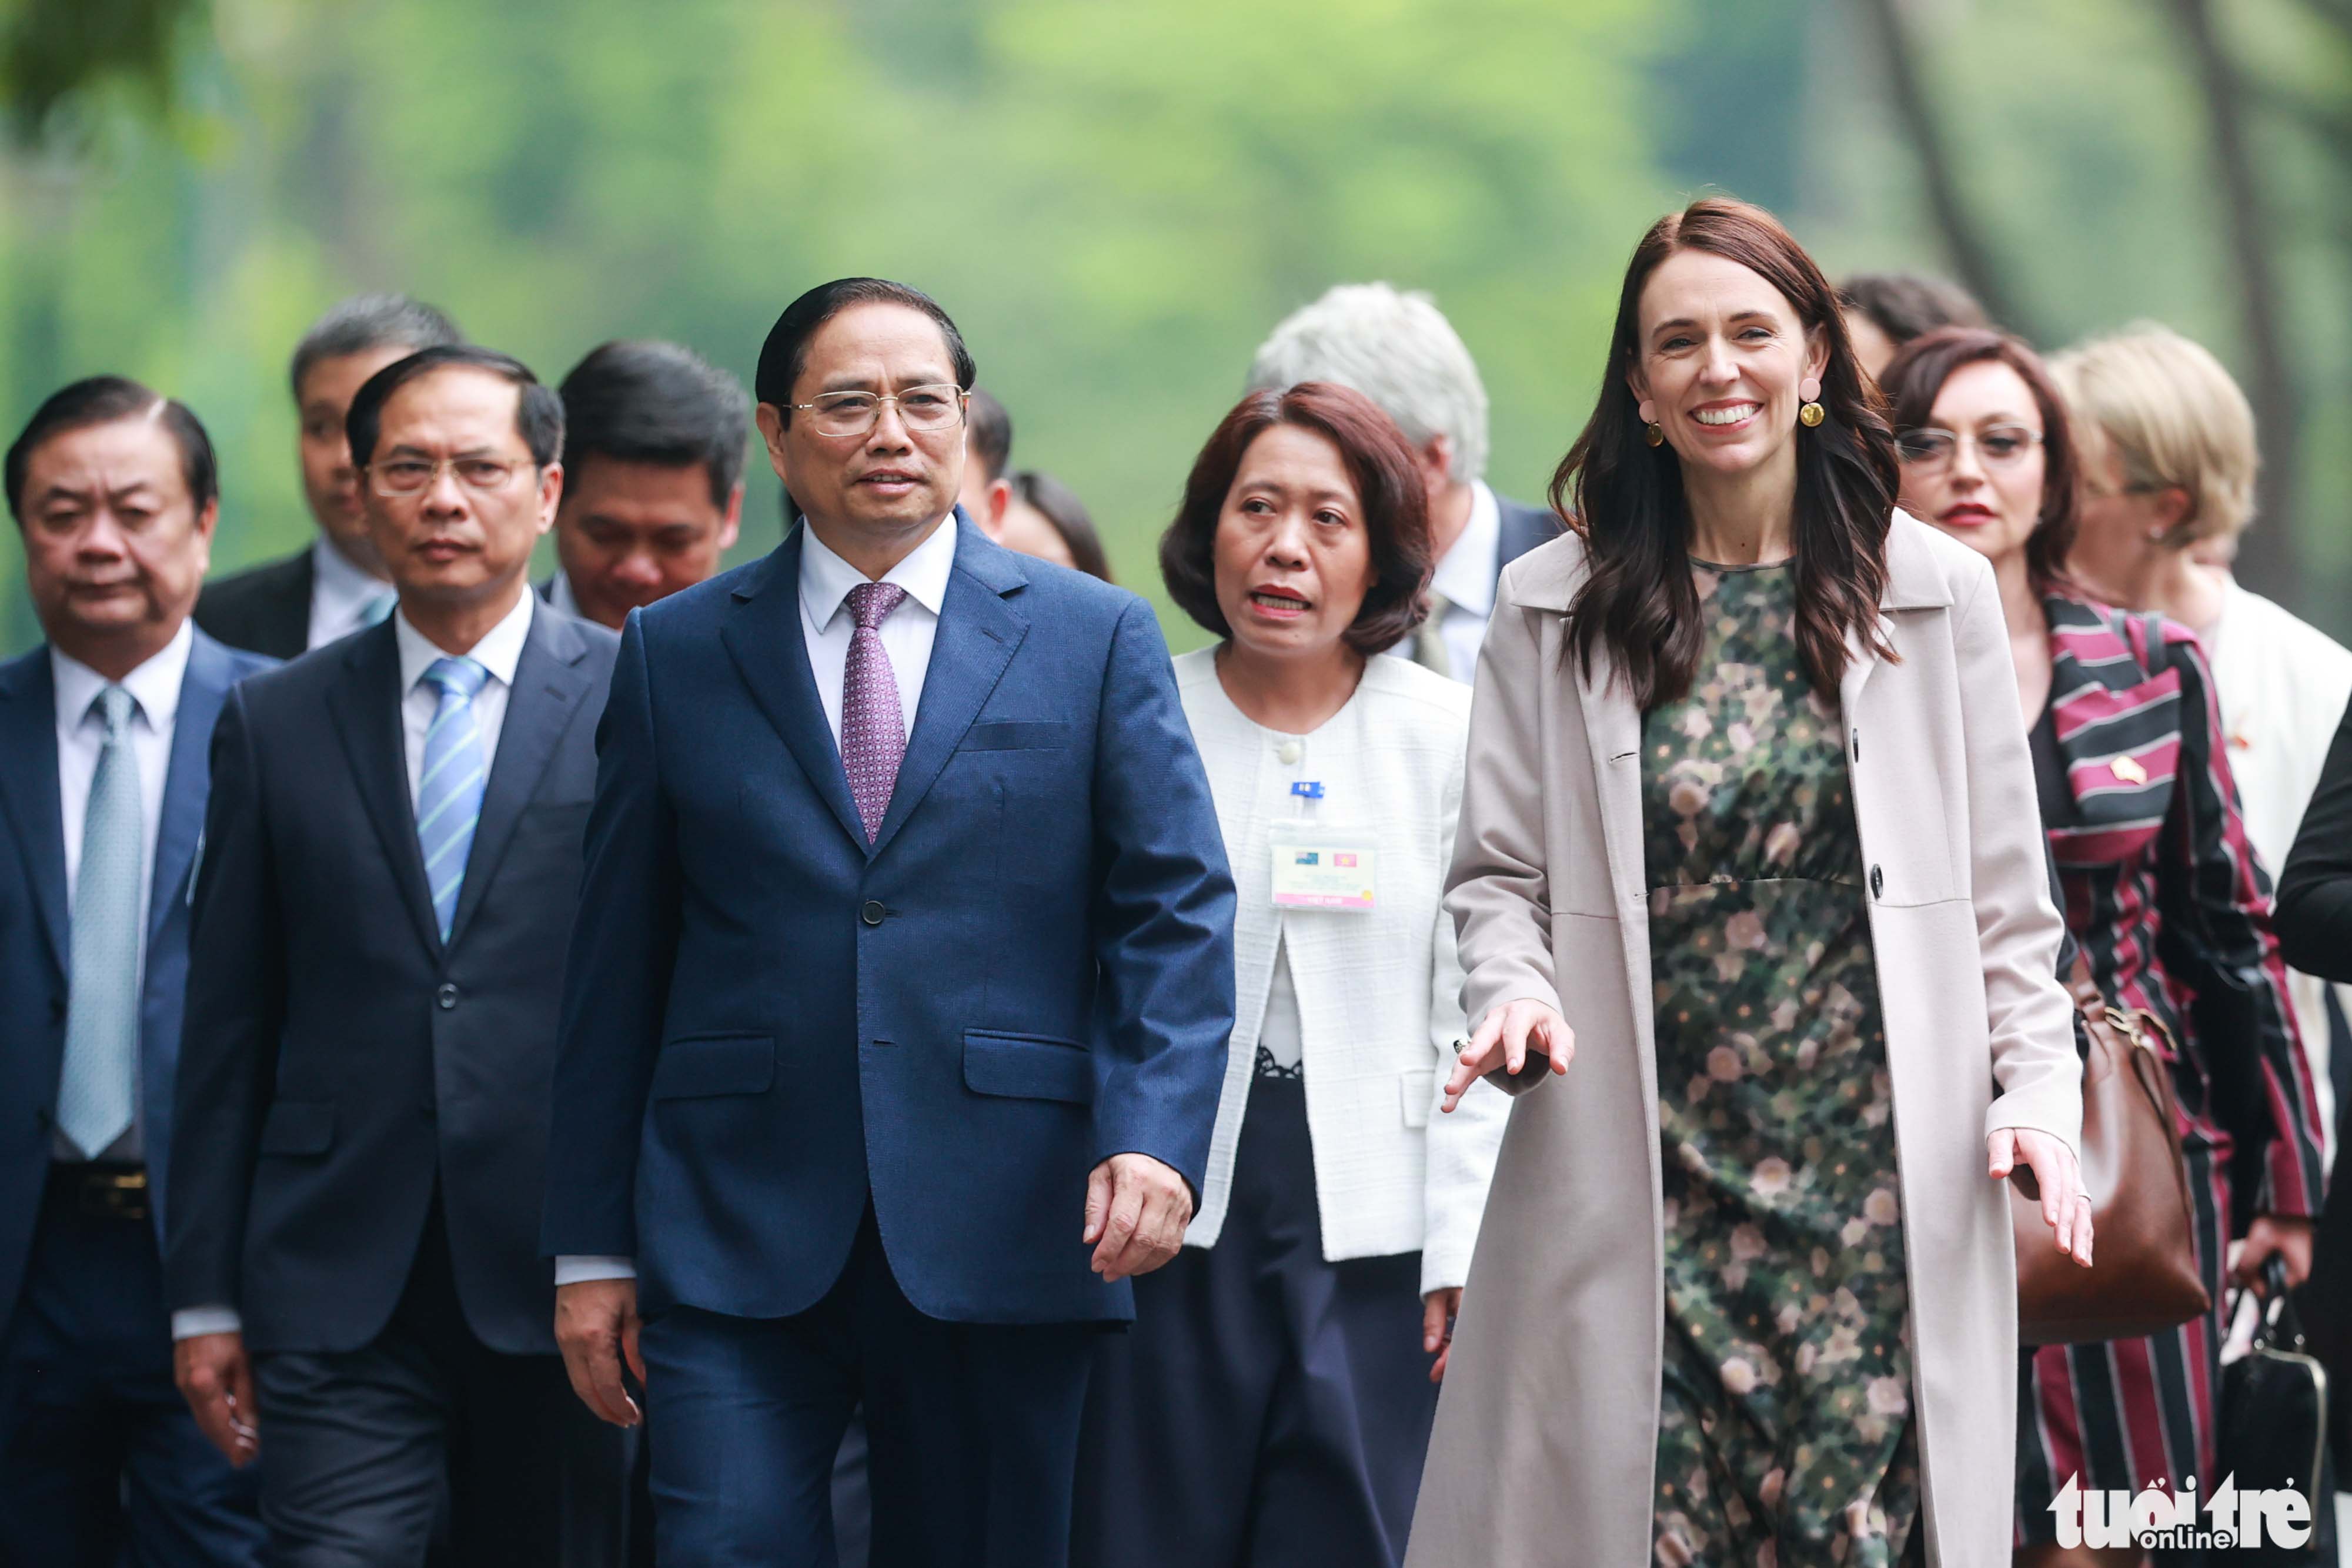 Vietnamese Prime Minister Pham Minh Chinh and New Zealand Prime Minister Jacinda Ardern during the welcome ceremony in Hanoi, November 14, 2022. Photo: Nguyen Khanh / Tuoi Tre